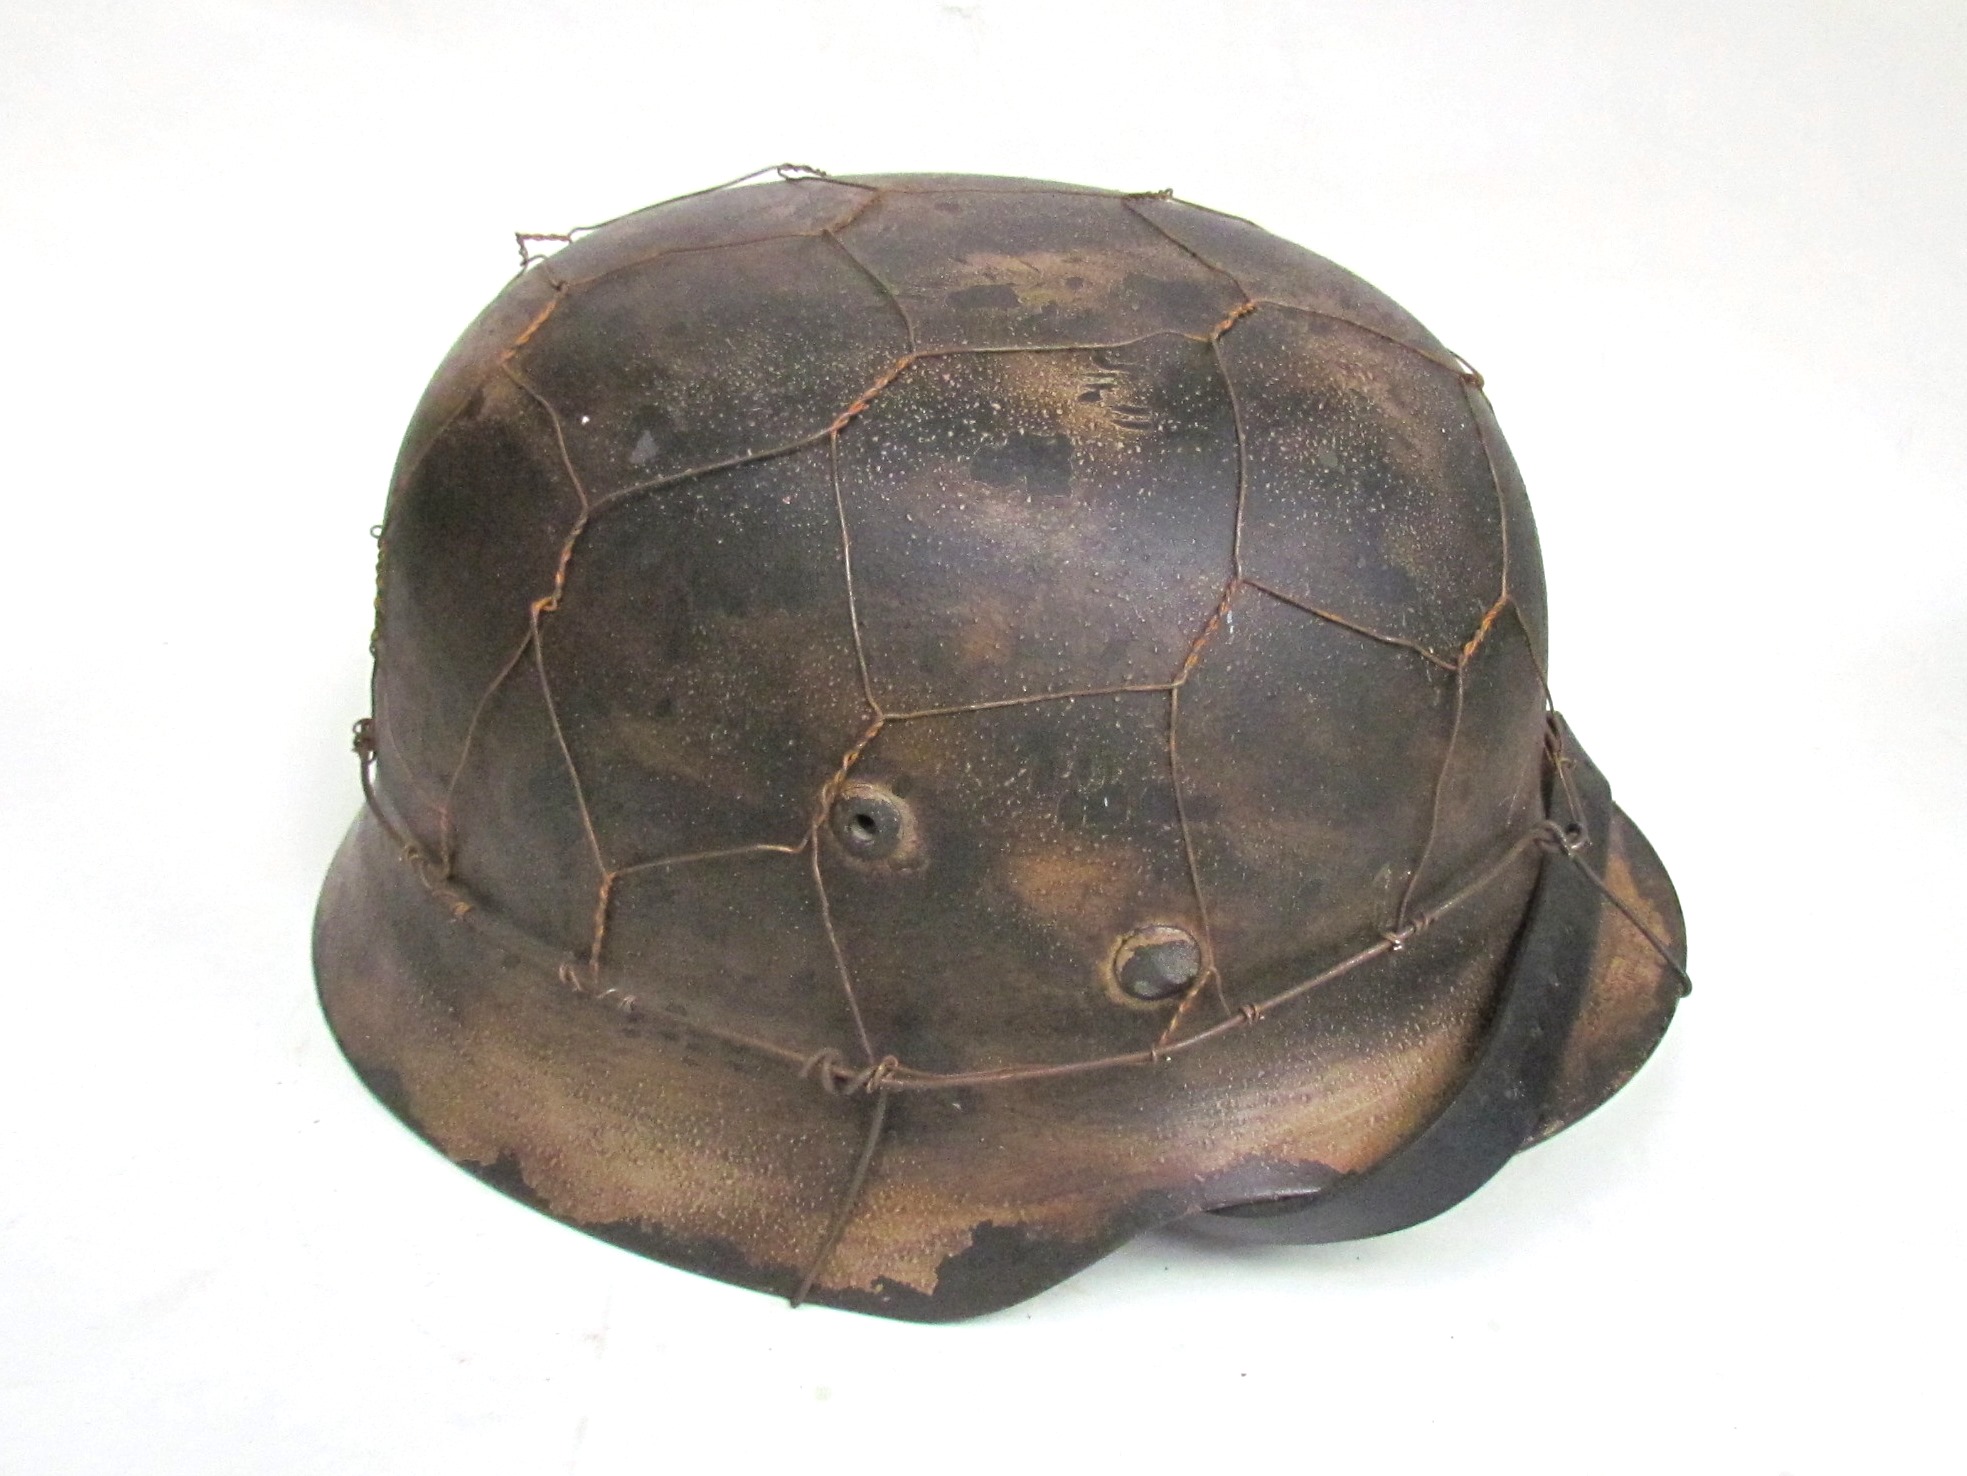 A copy of a German M40 helmet with distressed tan paintwork and mesh covering